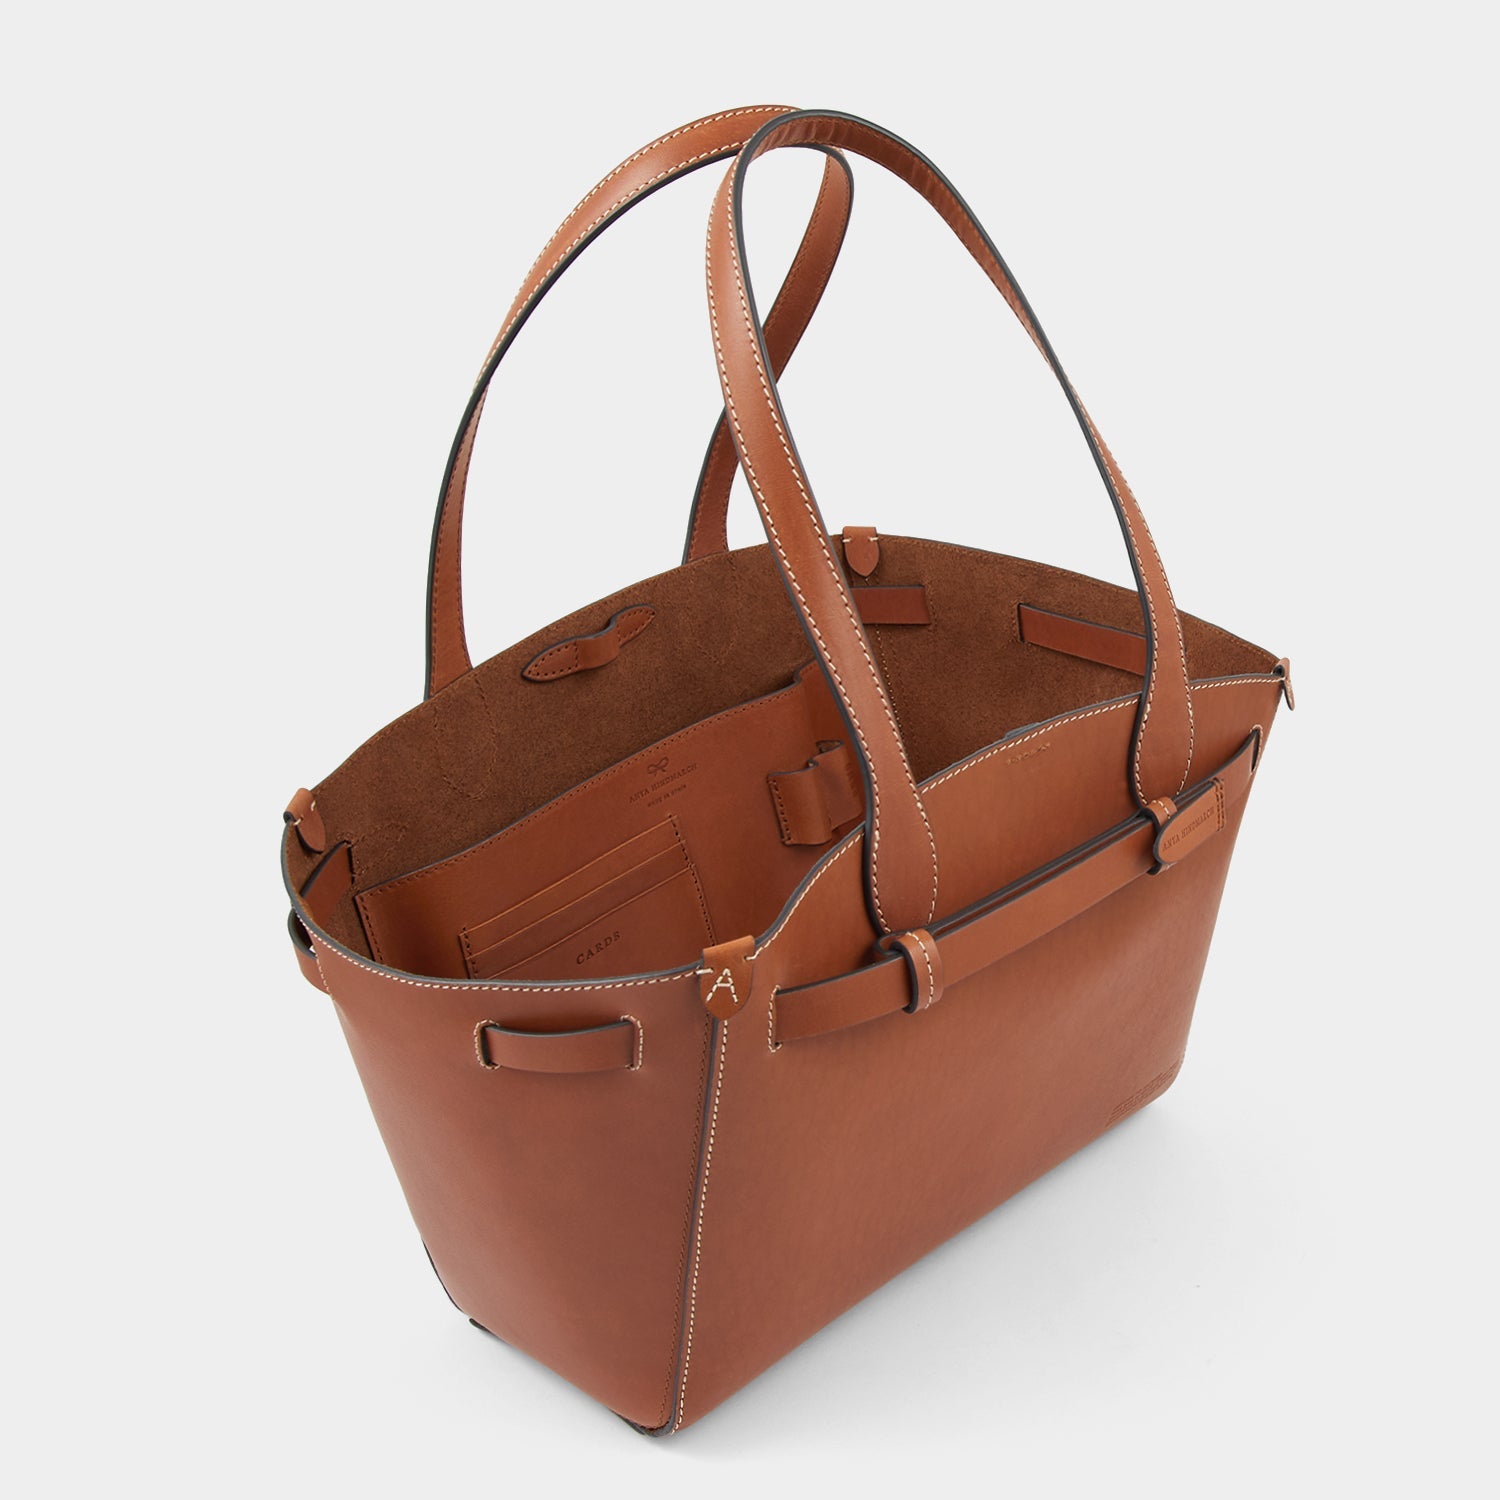 Return to Nature Small Tote -

                  
                    Compostable Leather in Tan -
                  

                  Anya Hindmarch US
